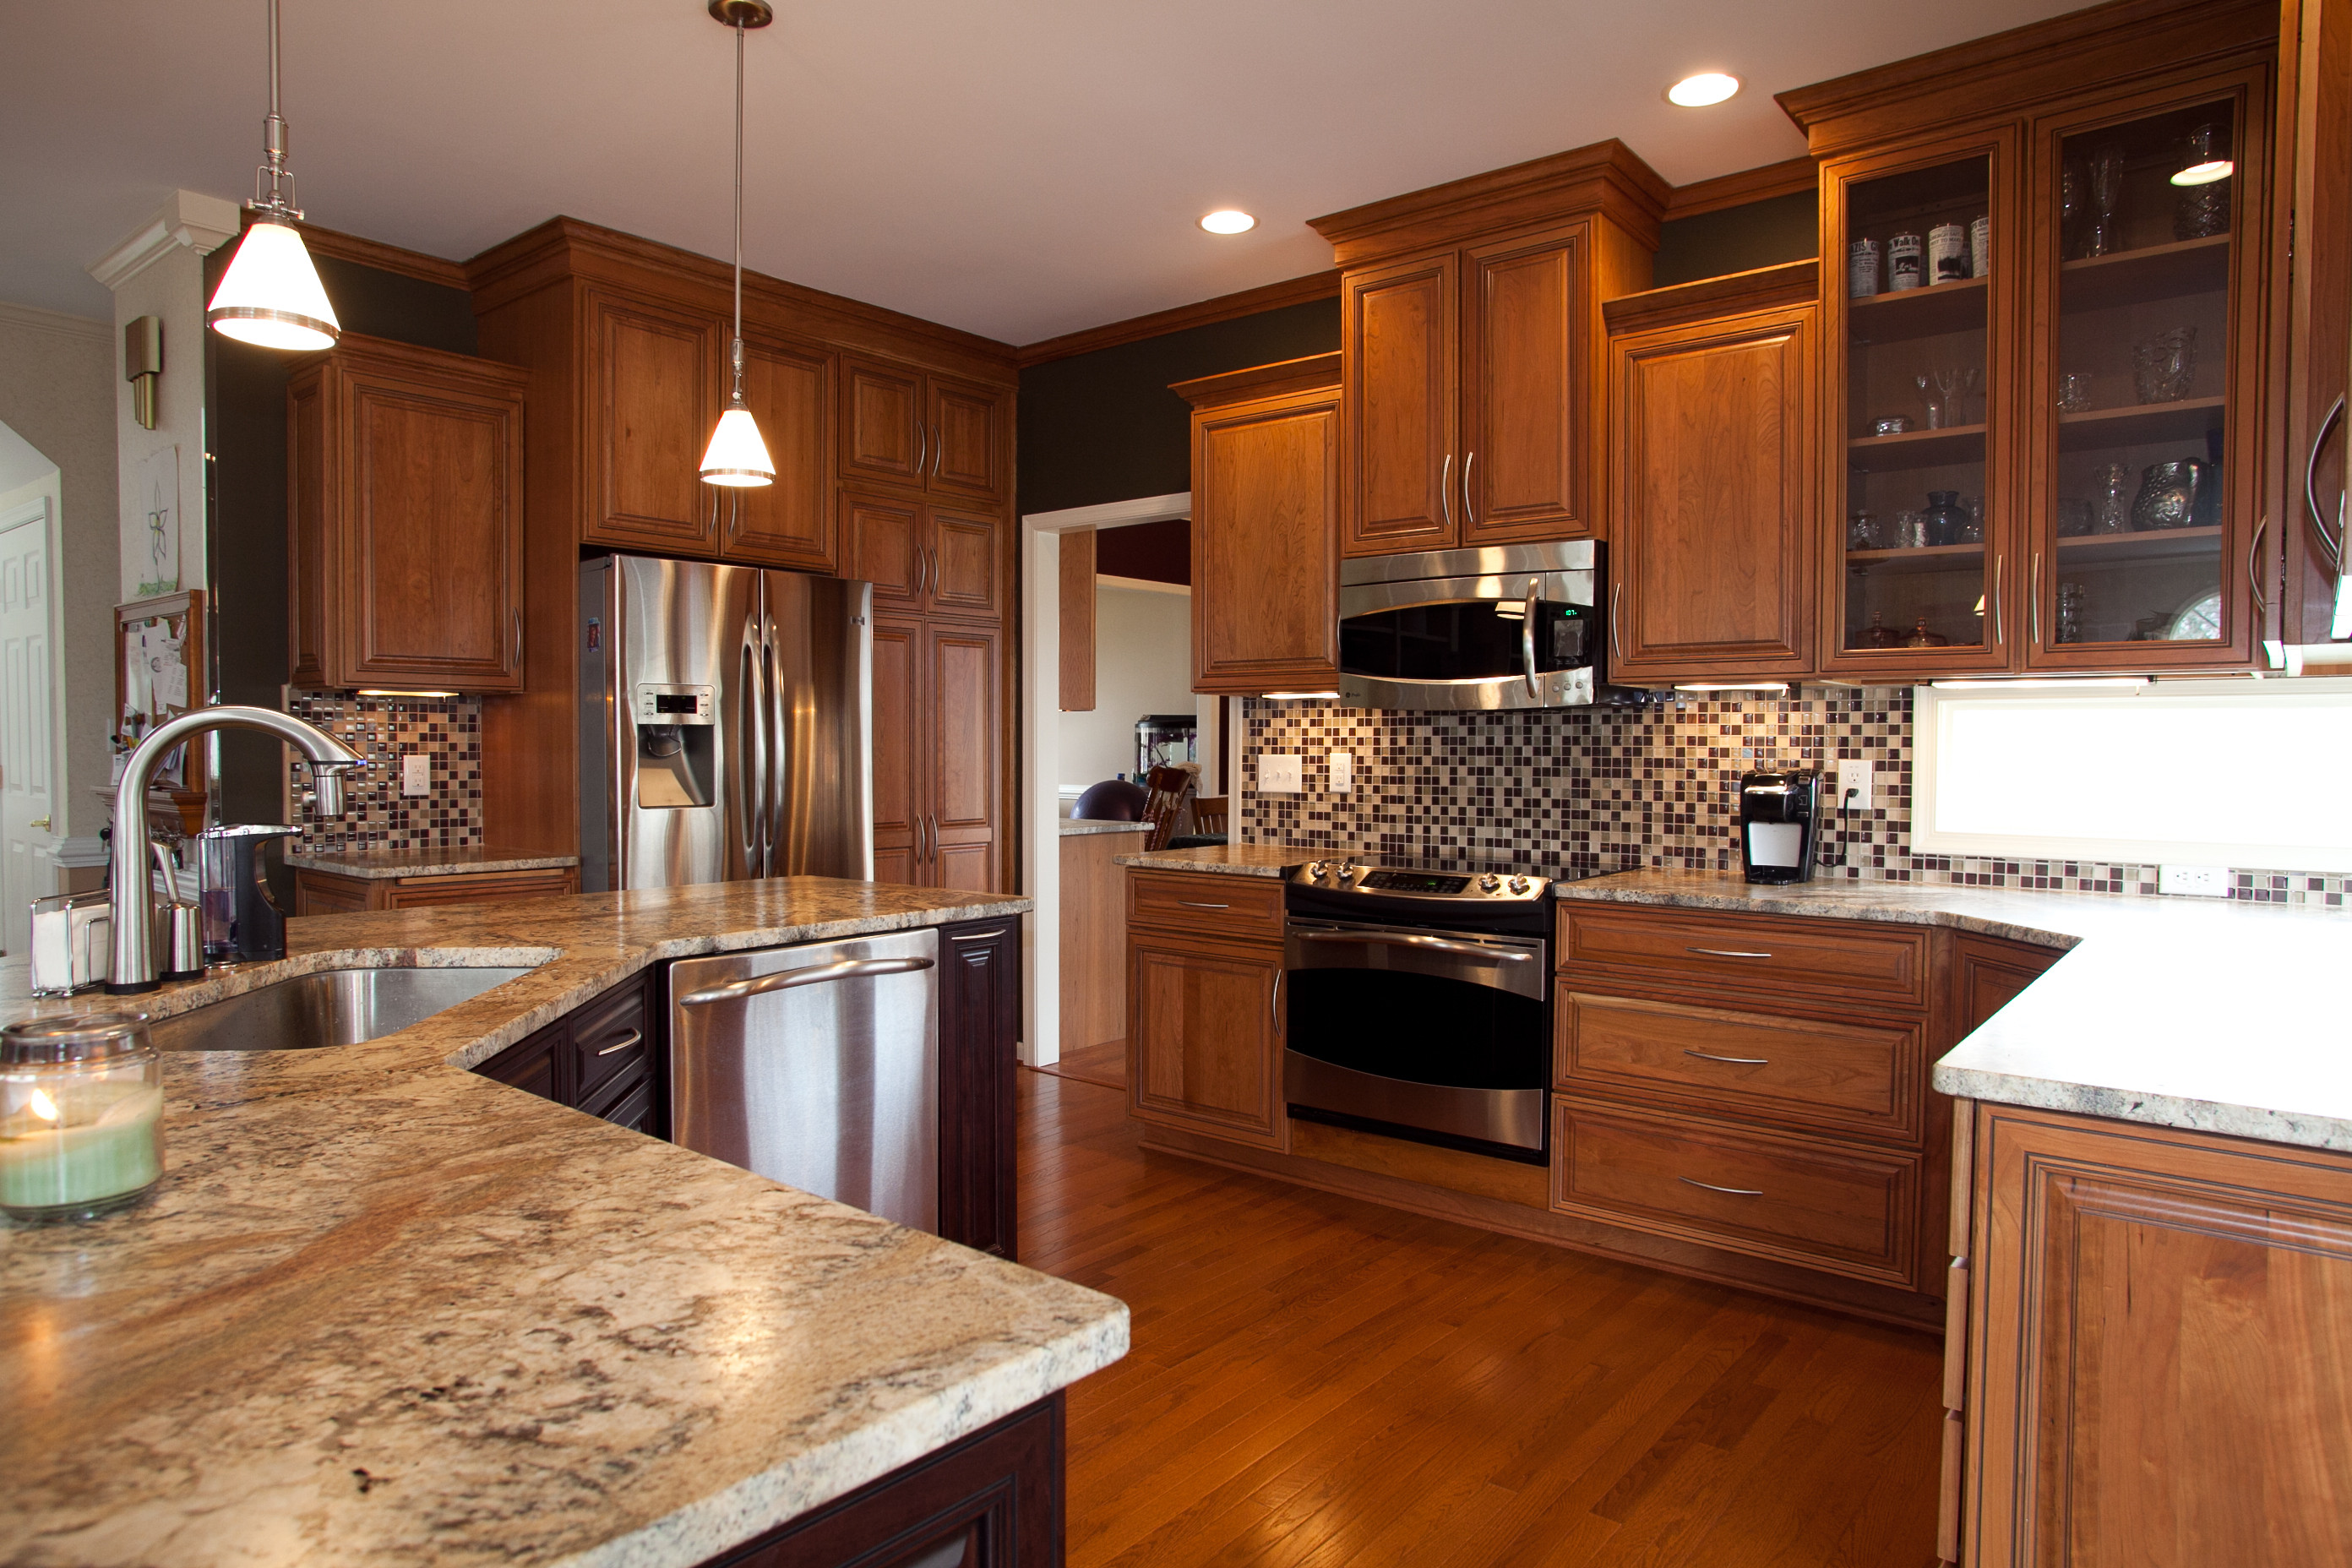 Kitchen Remodels Ideas Pictures
 Before During and After Kitchen Remodel in Yorktown